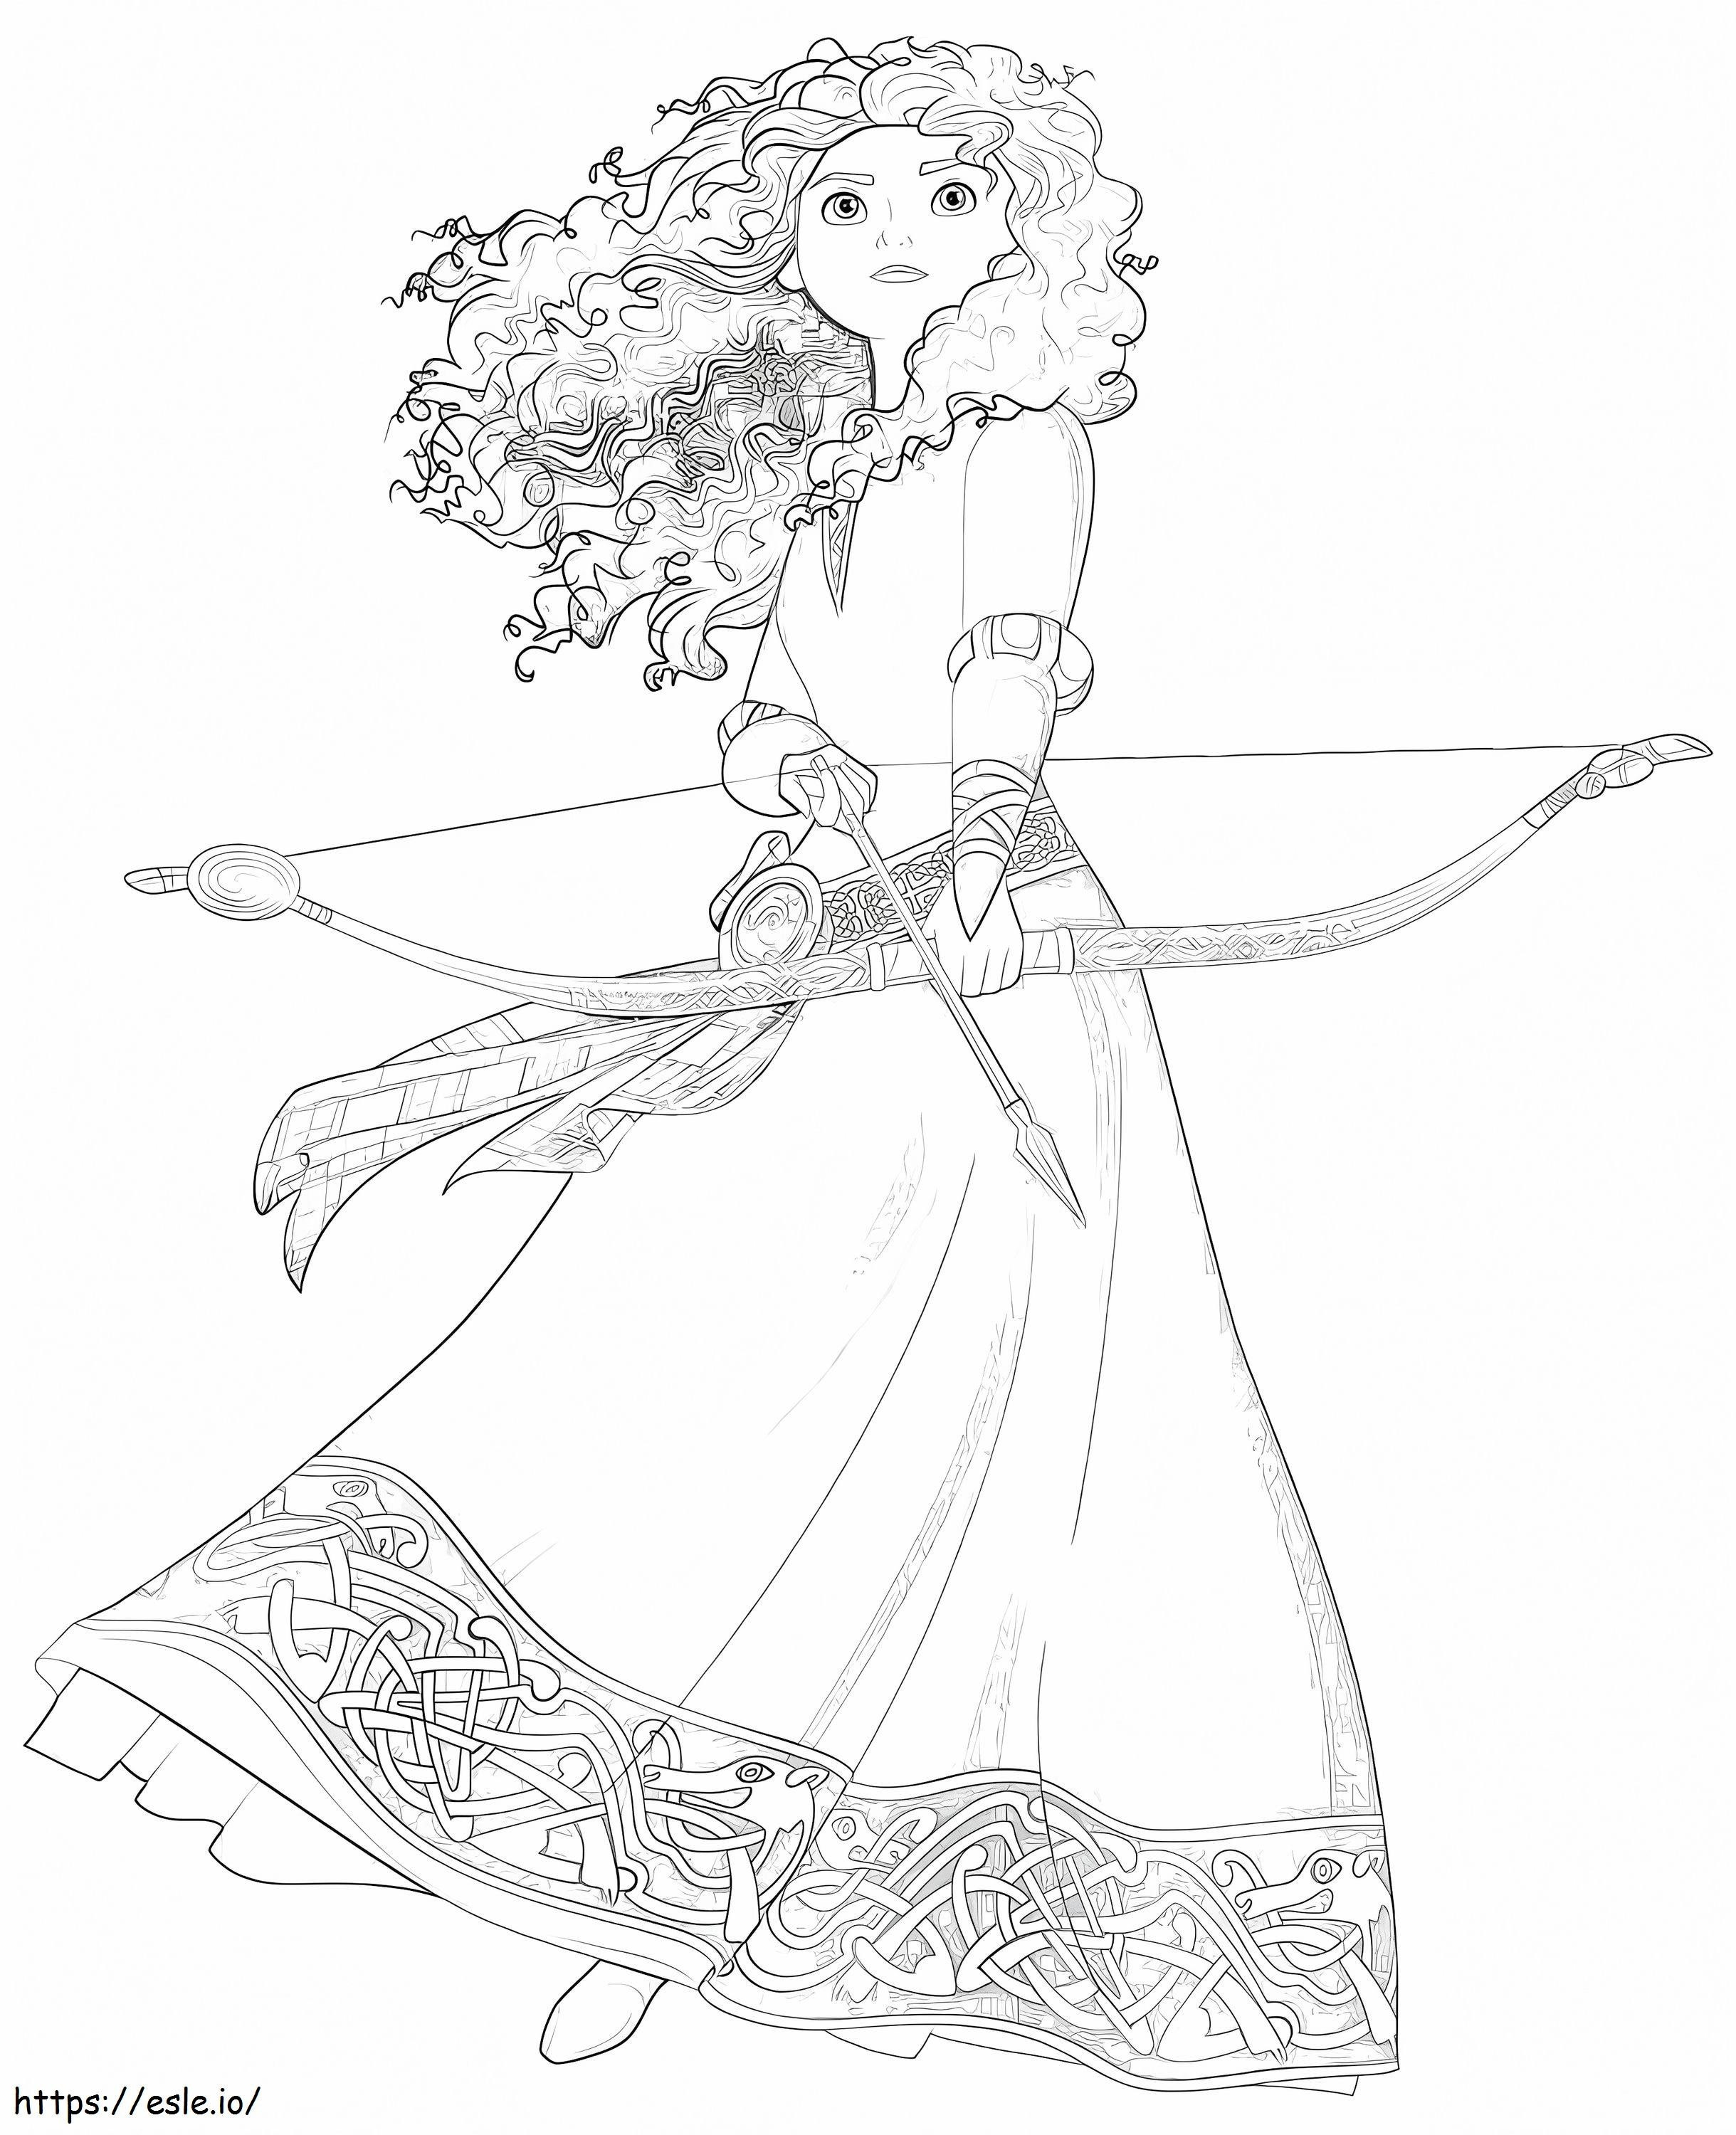 Princess Merida With Bow And Arrow 1 coloring page